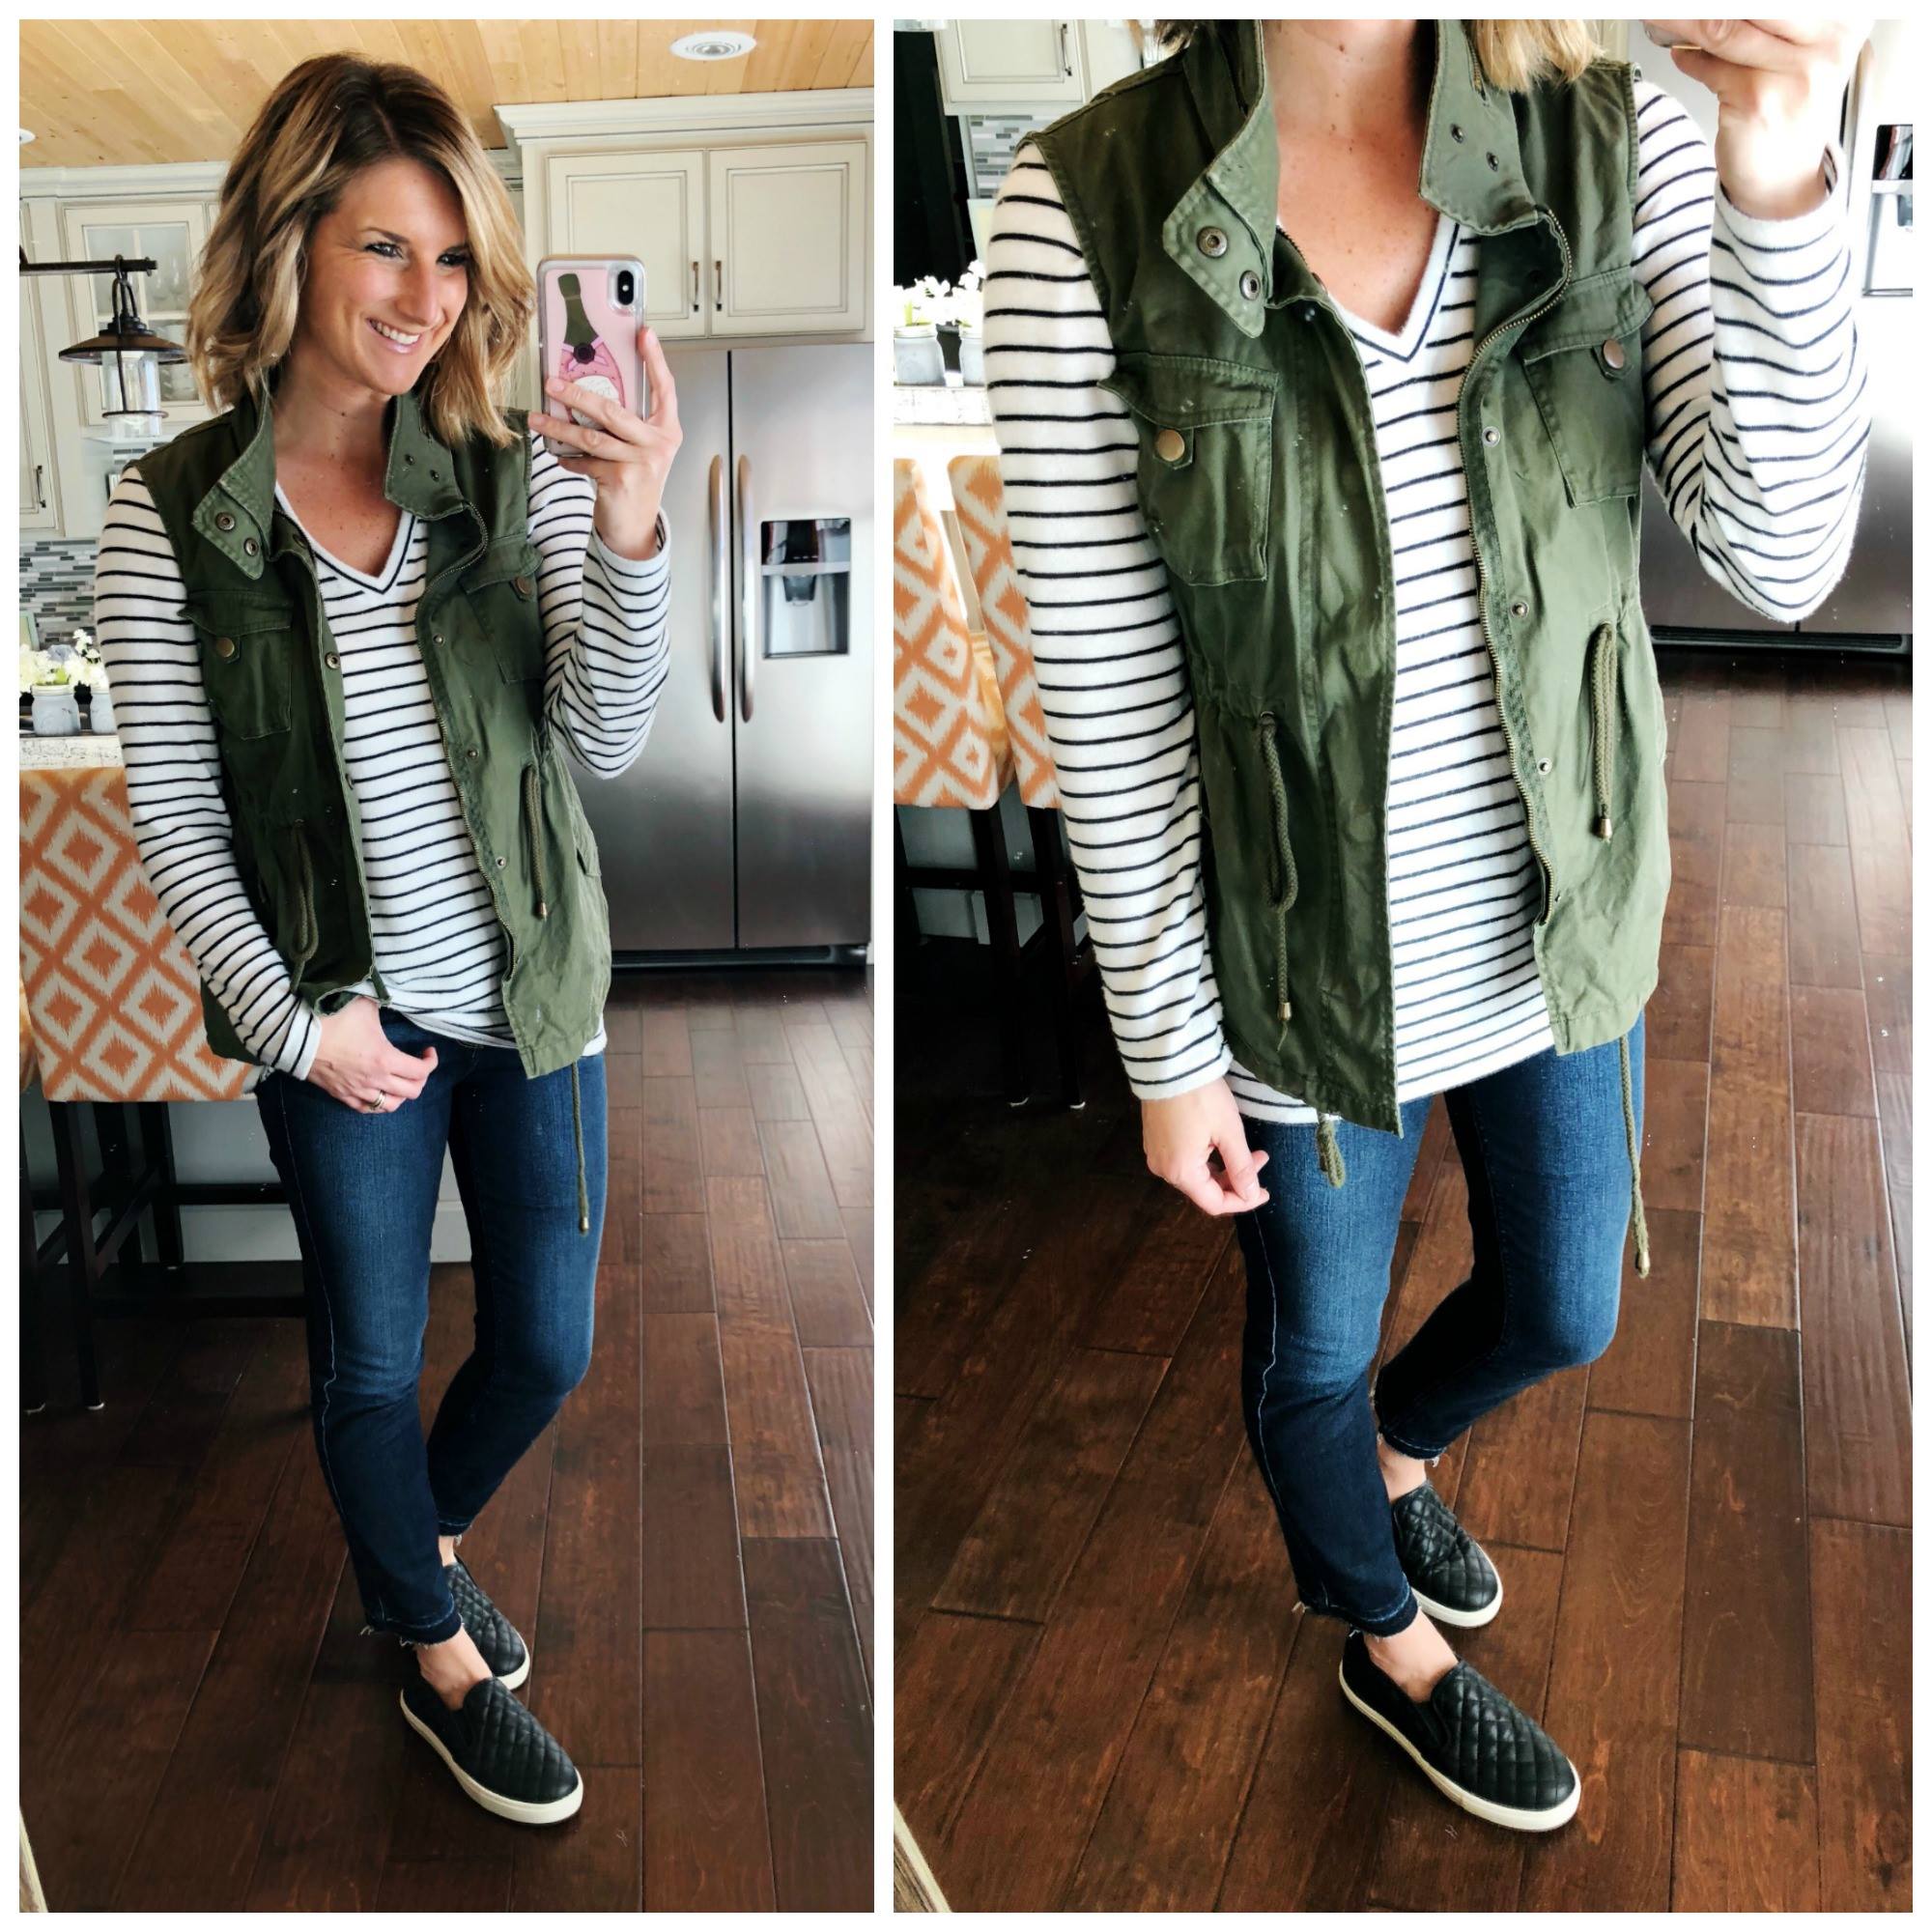 Spring Transitional Outfit // Striped Top + Release Hem Skinny Jeans + Military Vest + Black Sneakers // Spring Fashion